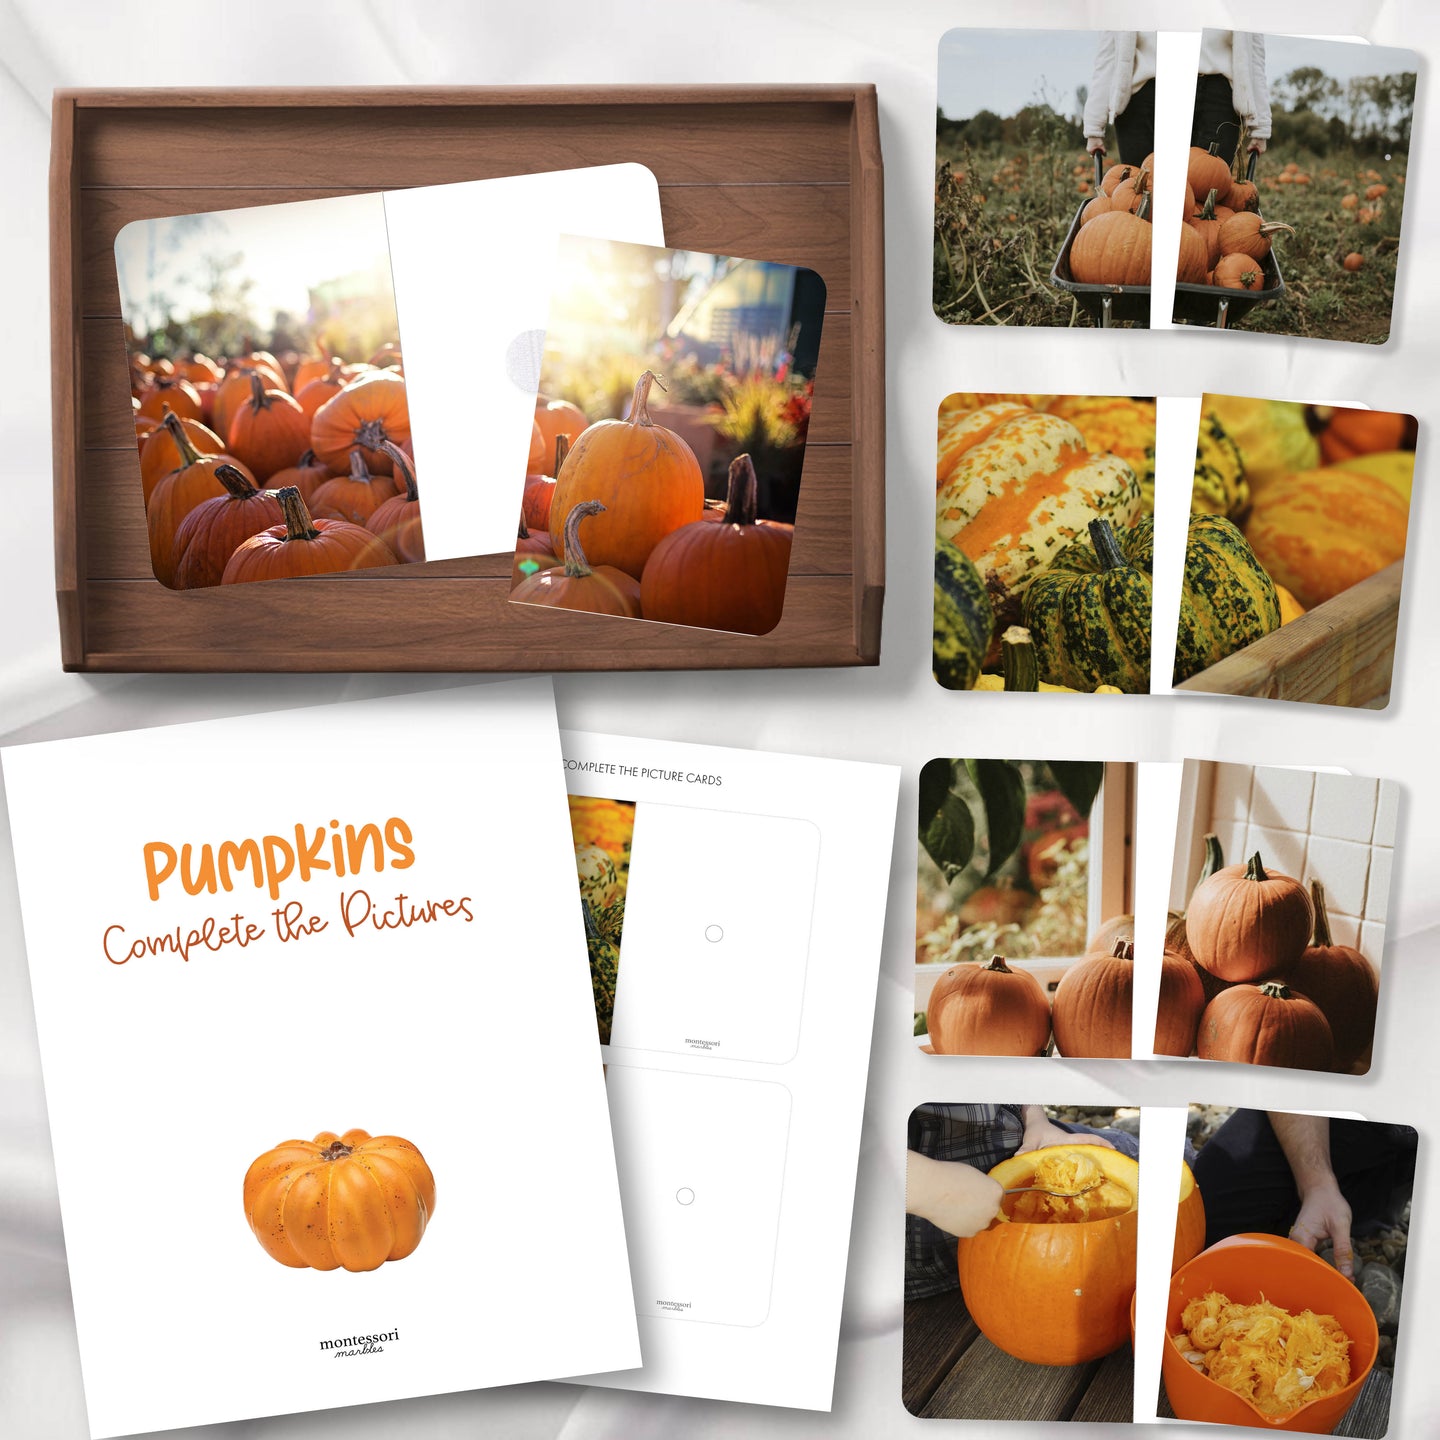 Pumpkins Complete the Pictures